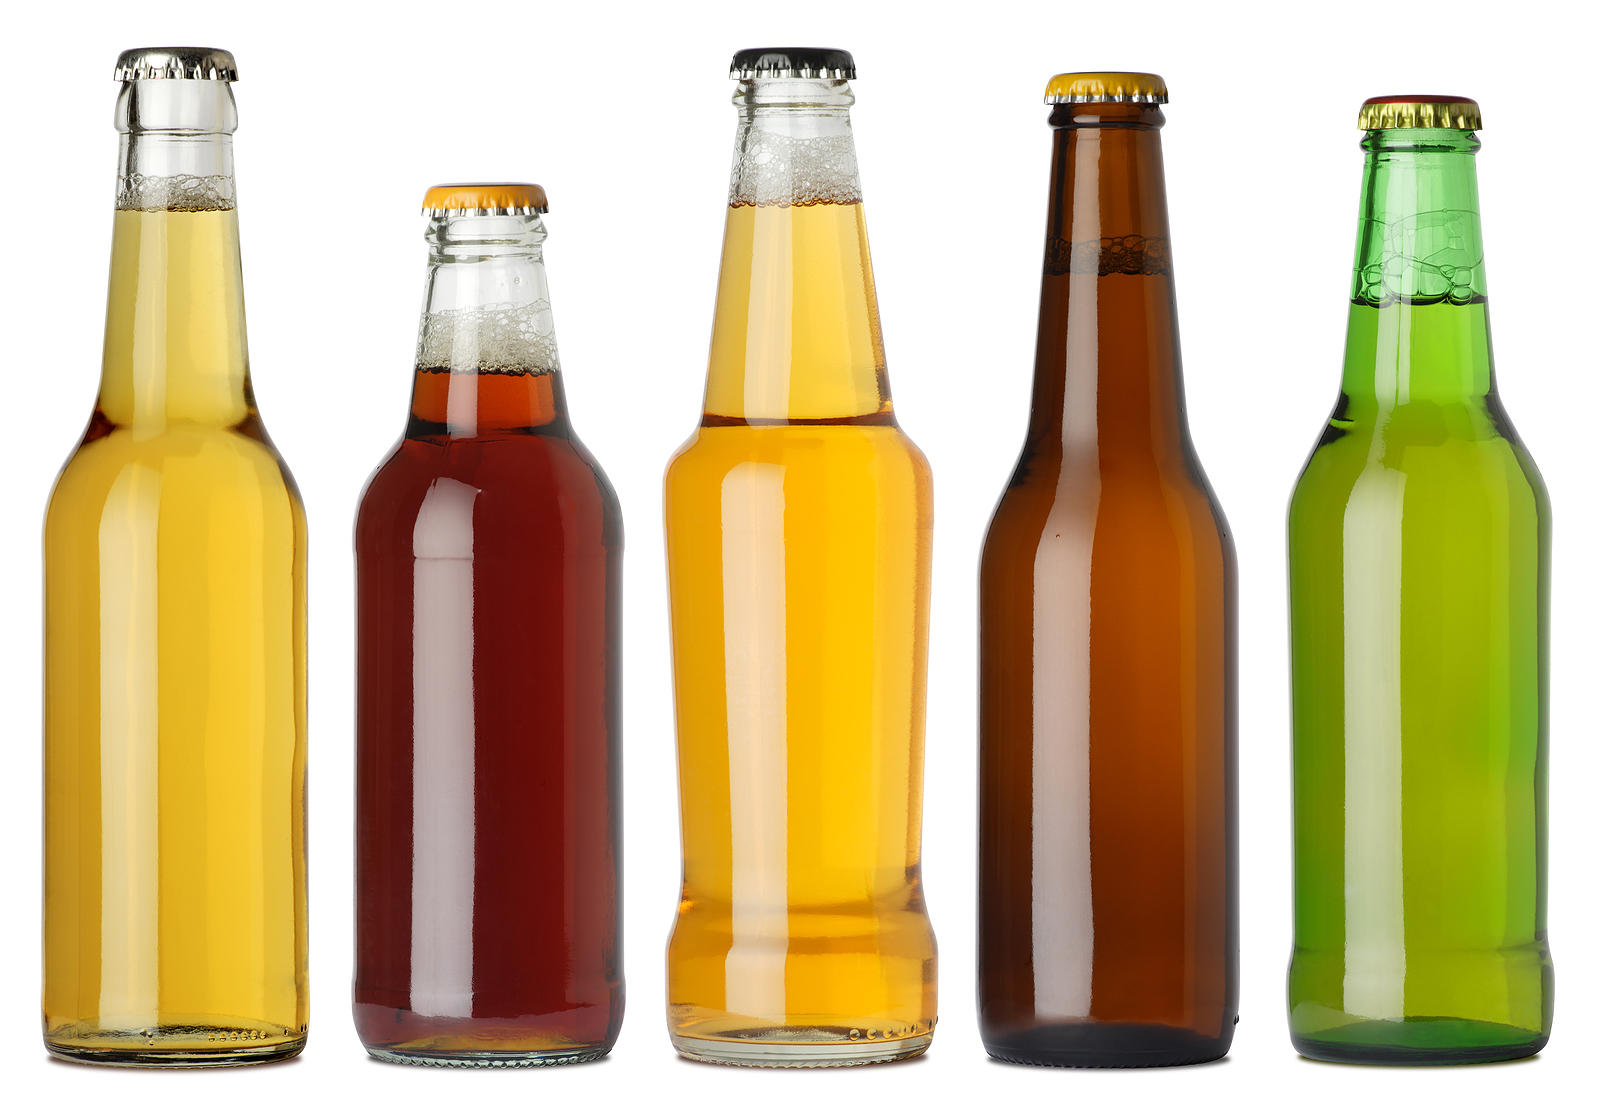 Photo of five different full beer bottles with no labels. Separate clipping path for each bottle included. Five separate photos merged together.